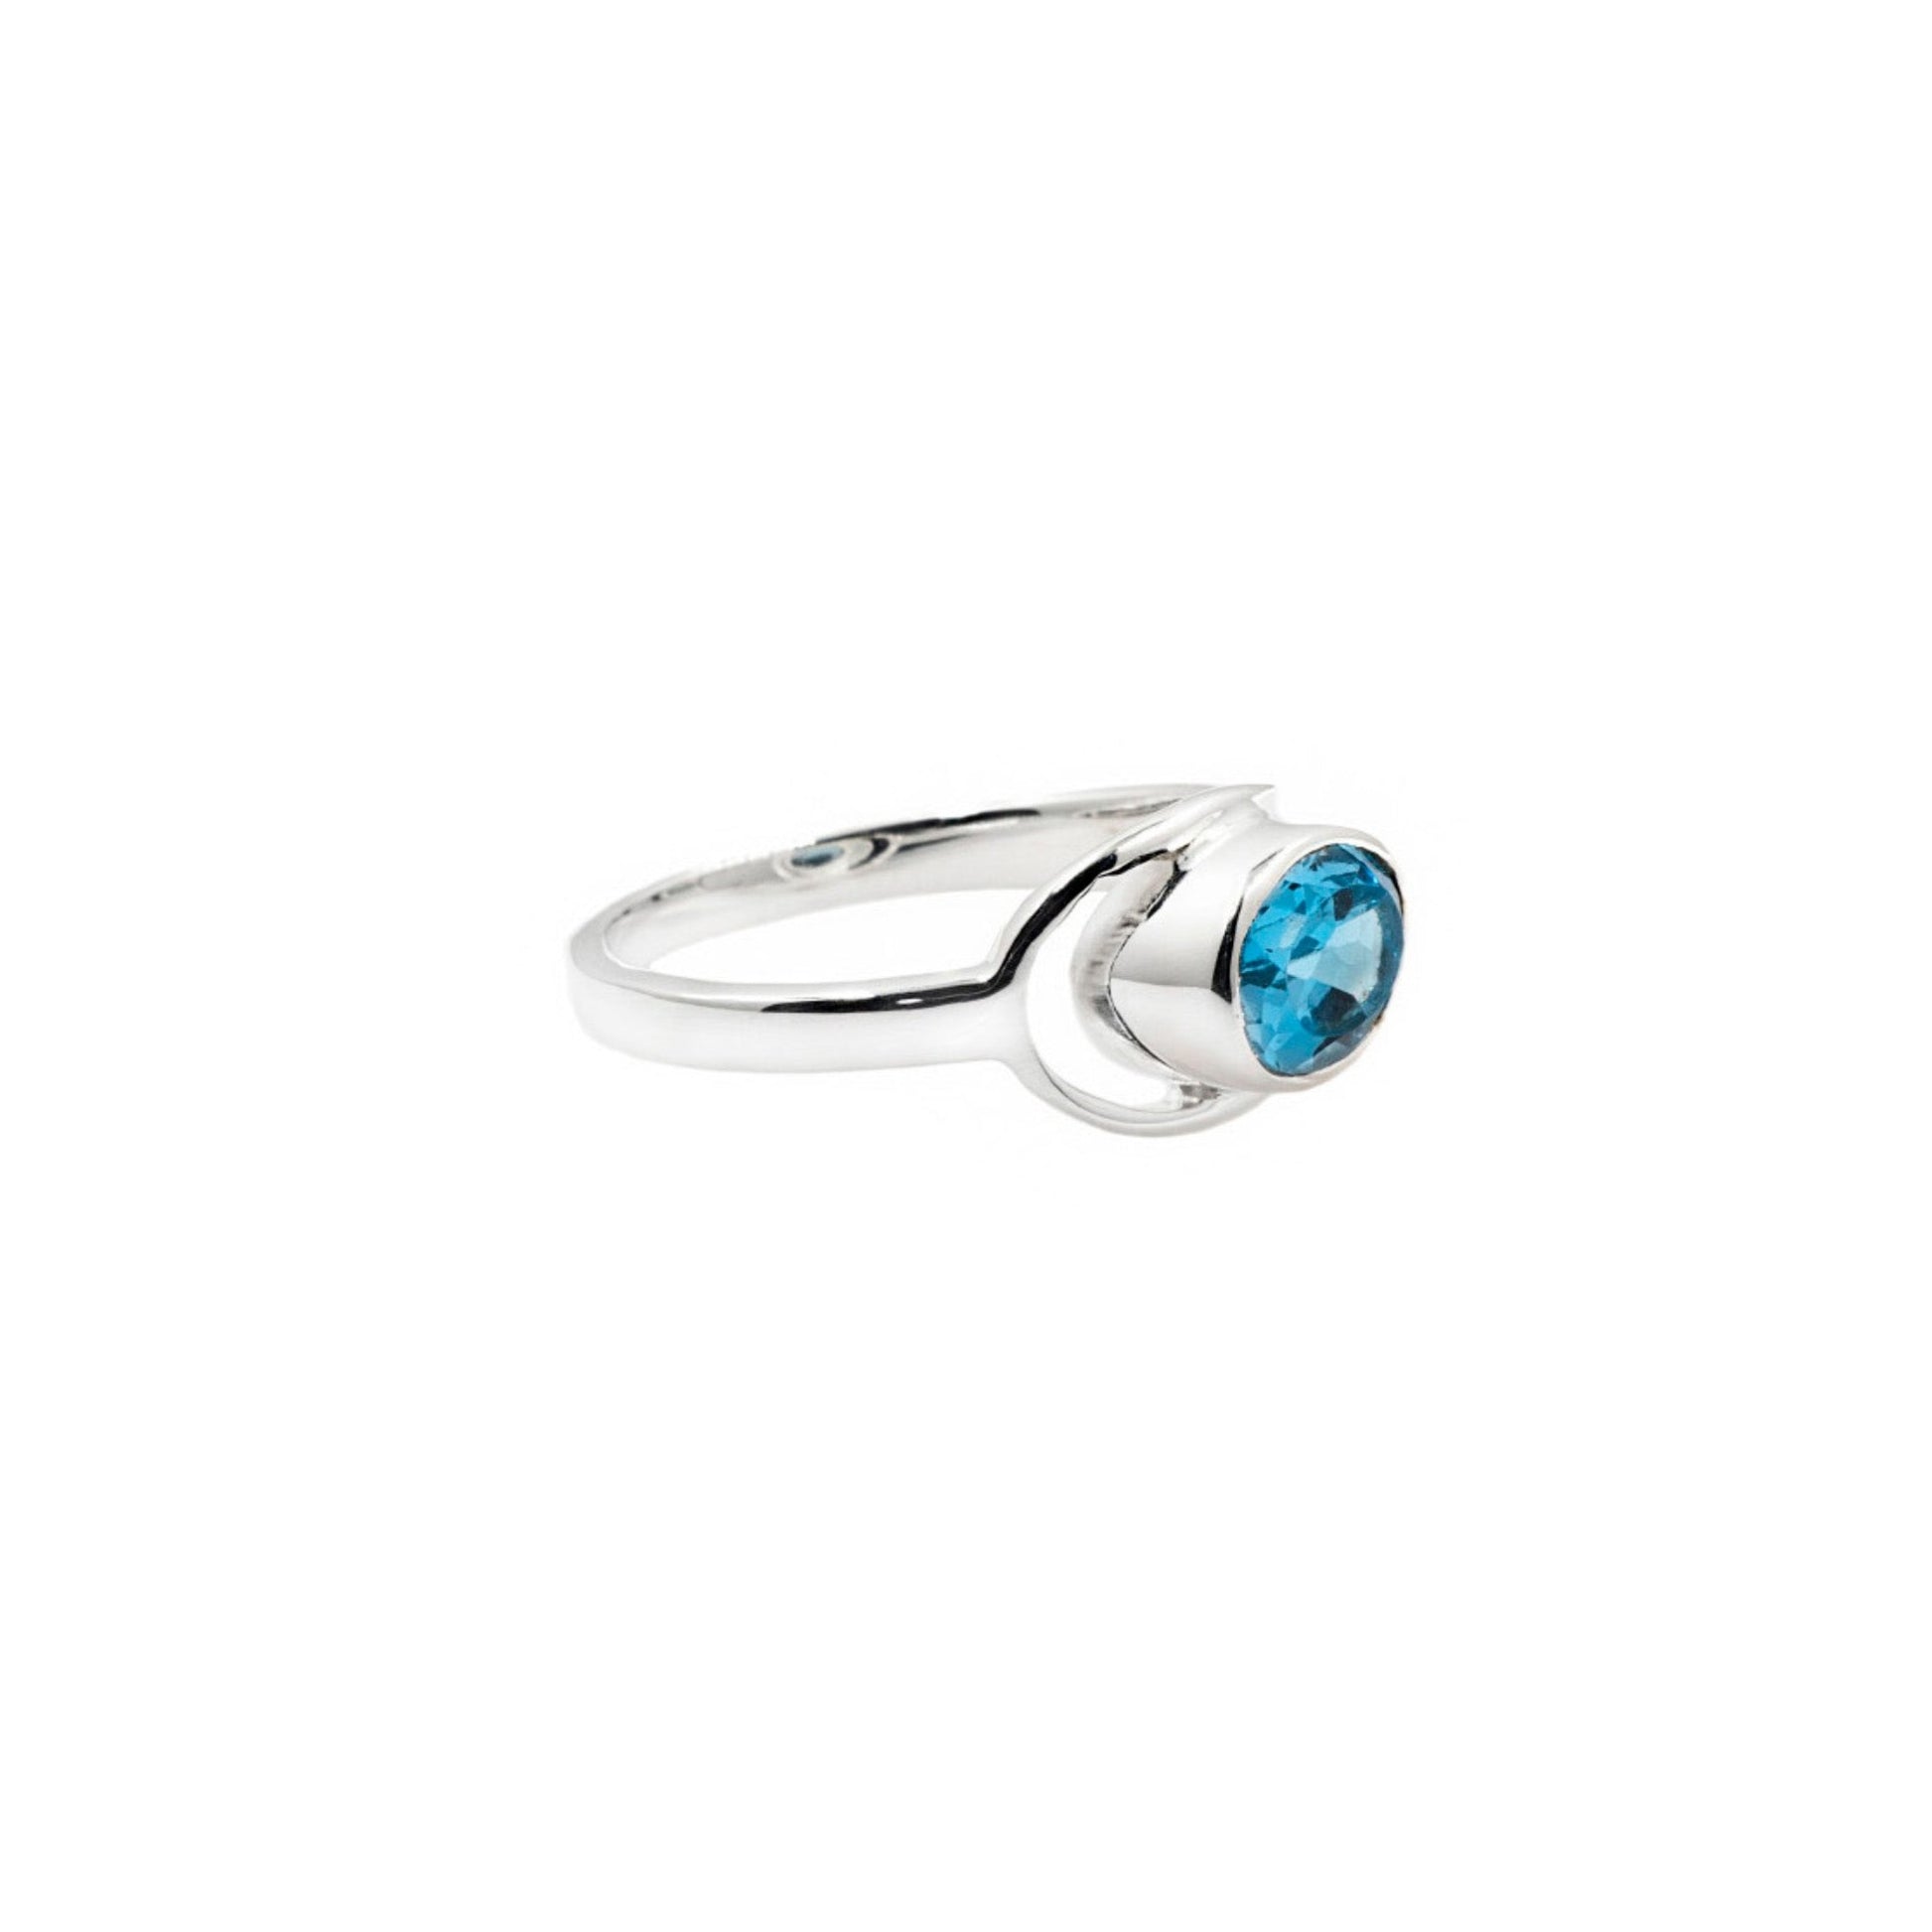 Blue Topaz Oval Ring Sterling Silver - Twisted Earth Artistry